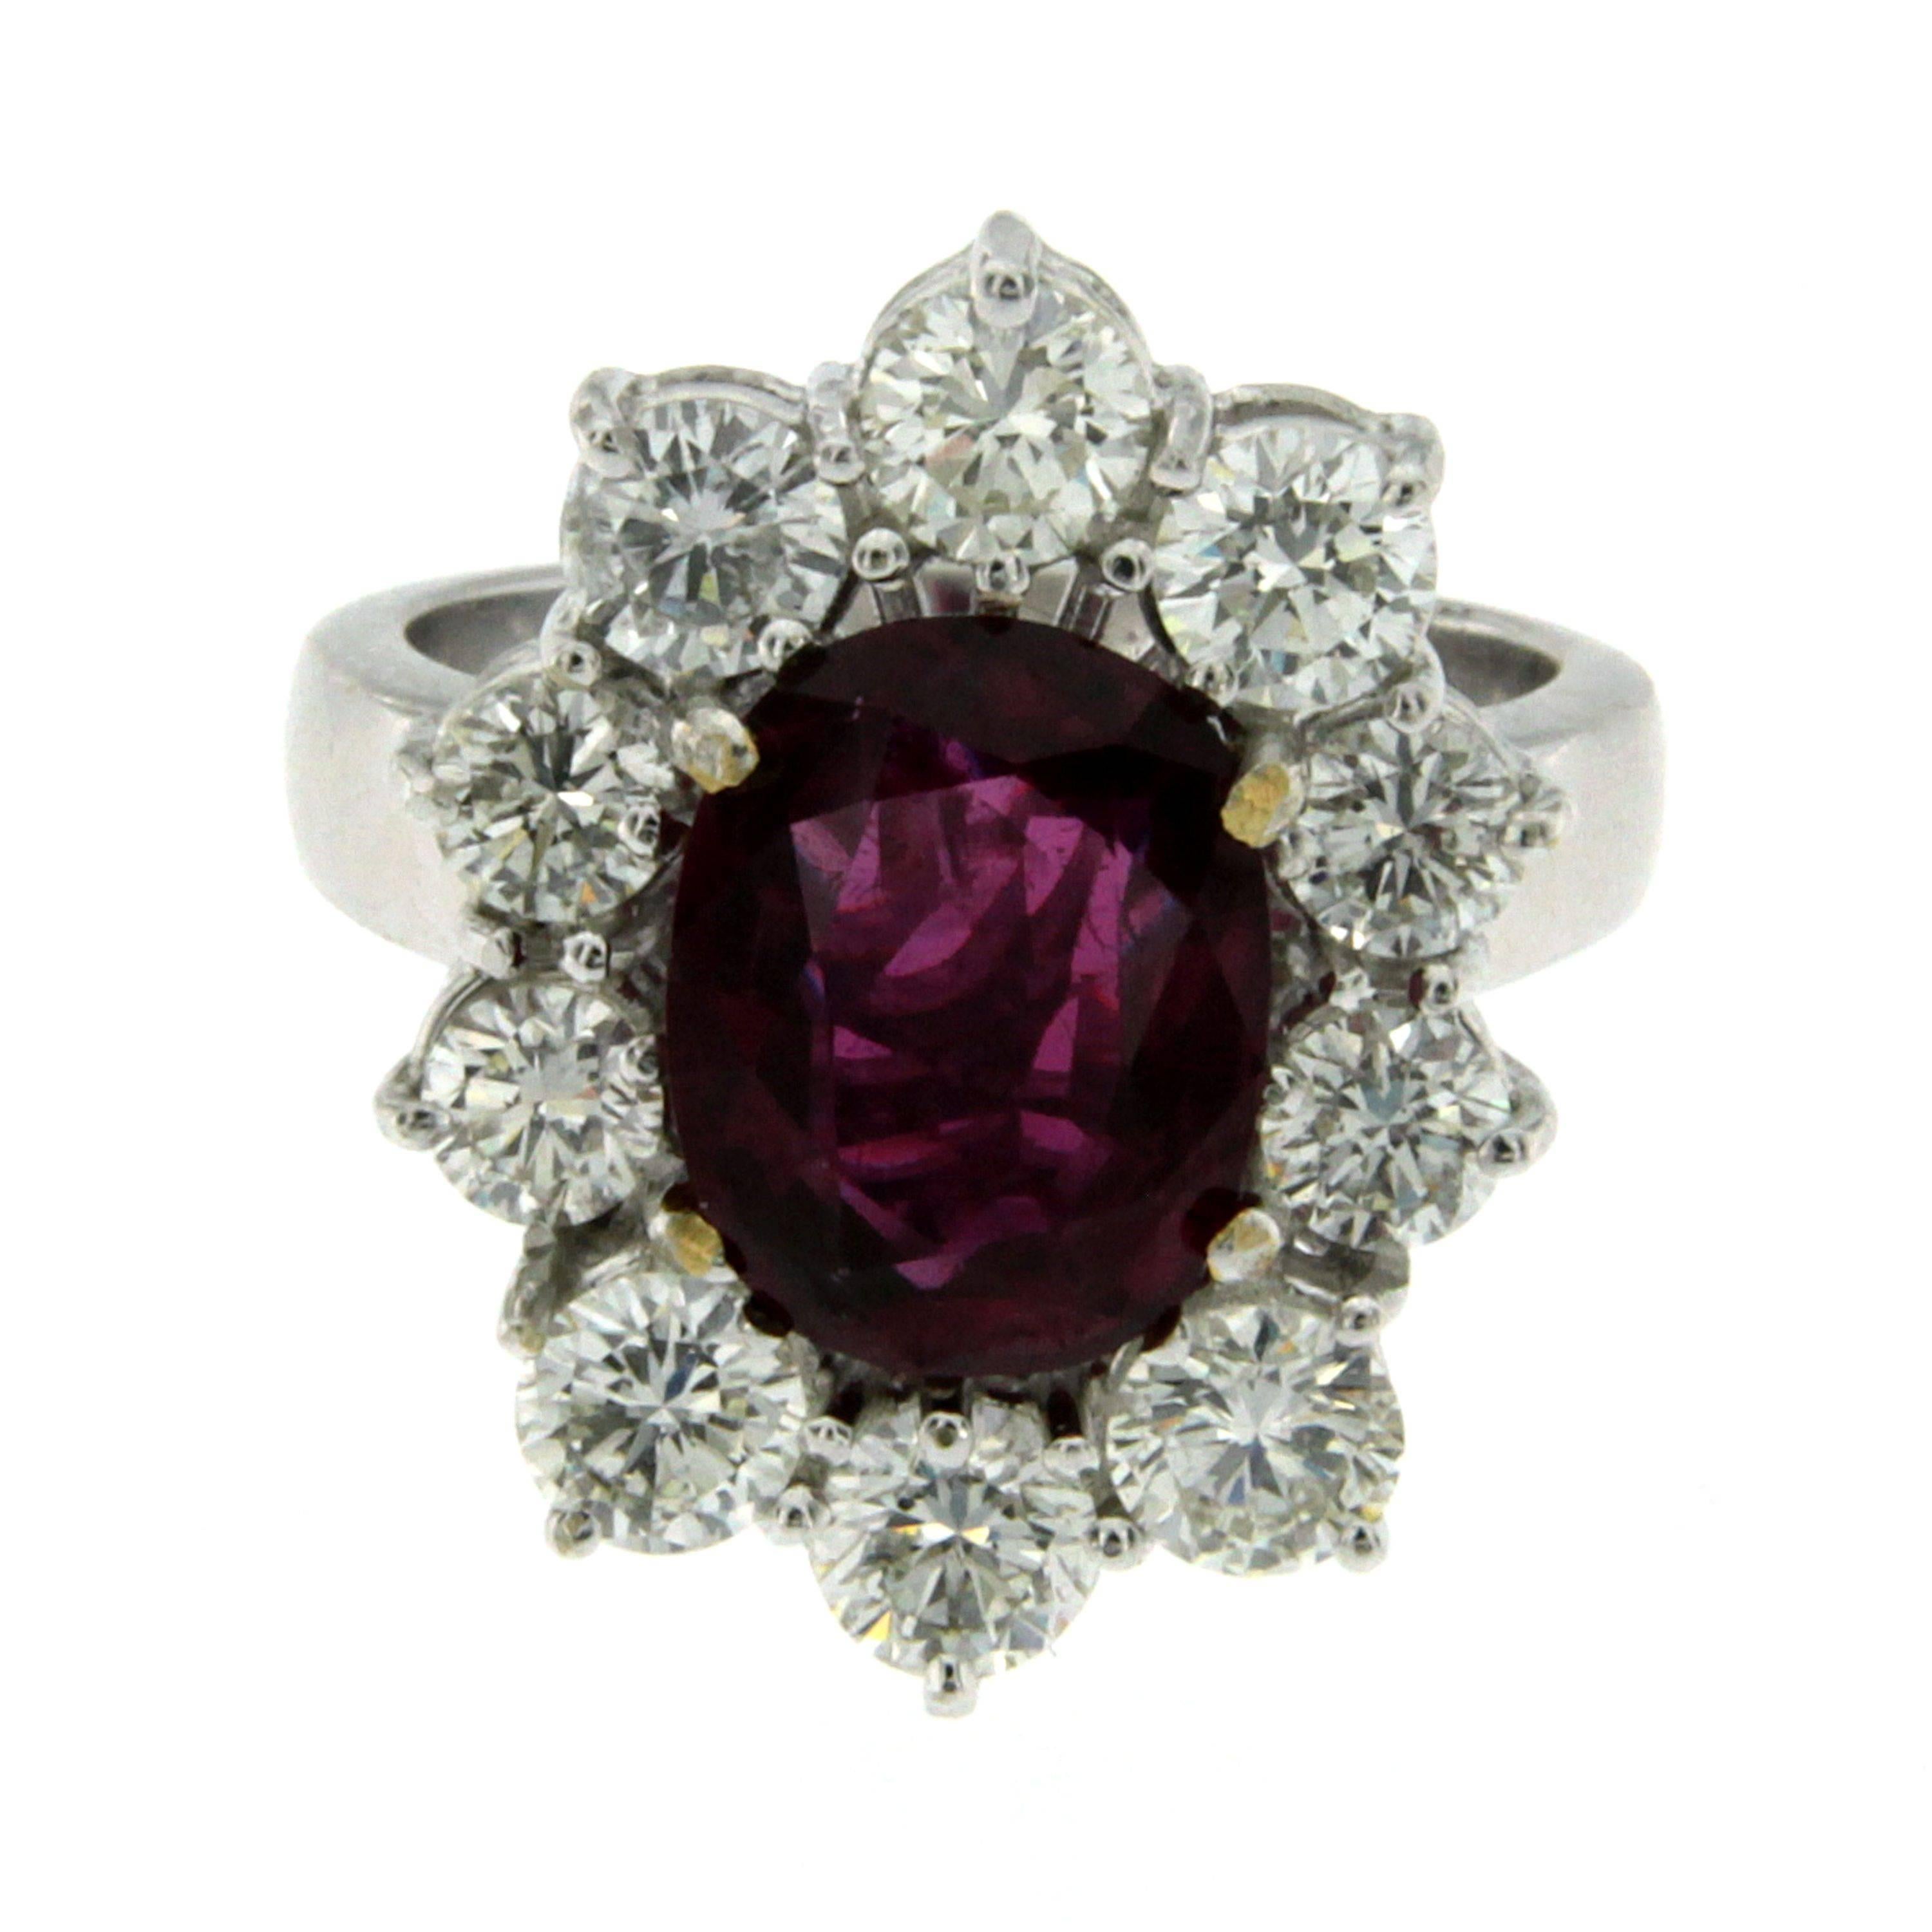 This beautiful 18k white Gold cluster ring features a 3.81 Carat oval-cut Ruby, origin Thailand, with a vibrant and rich color flanked by 10 round cut Diamonds for a total approx. weight of 3.00 carats color G/H  Vvs.

Ring Size:  US 7 -  IT 14  -